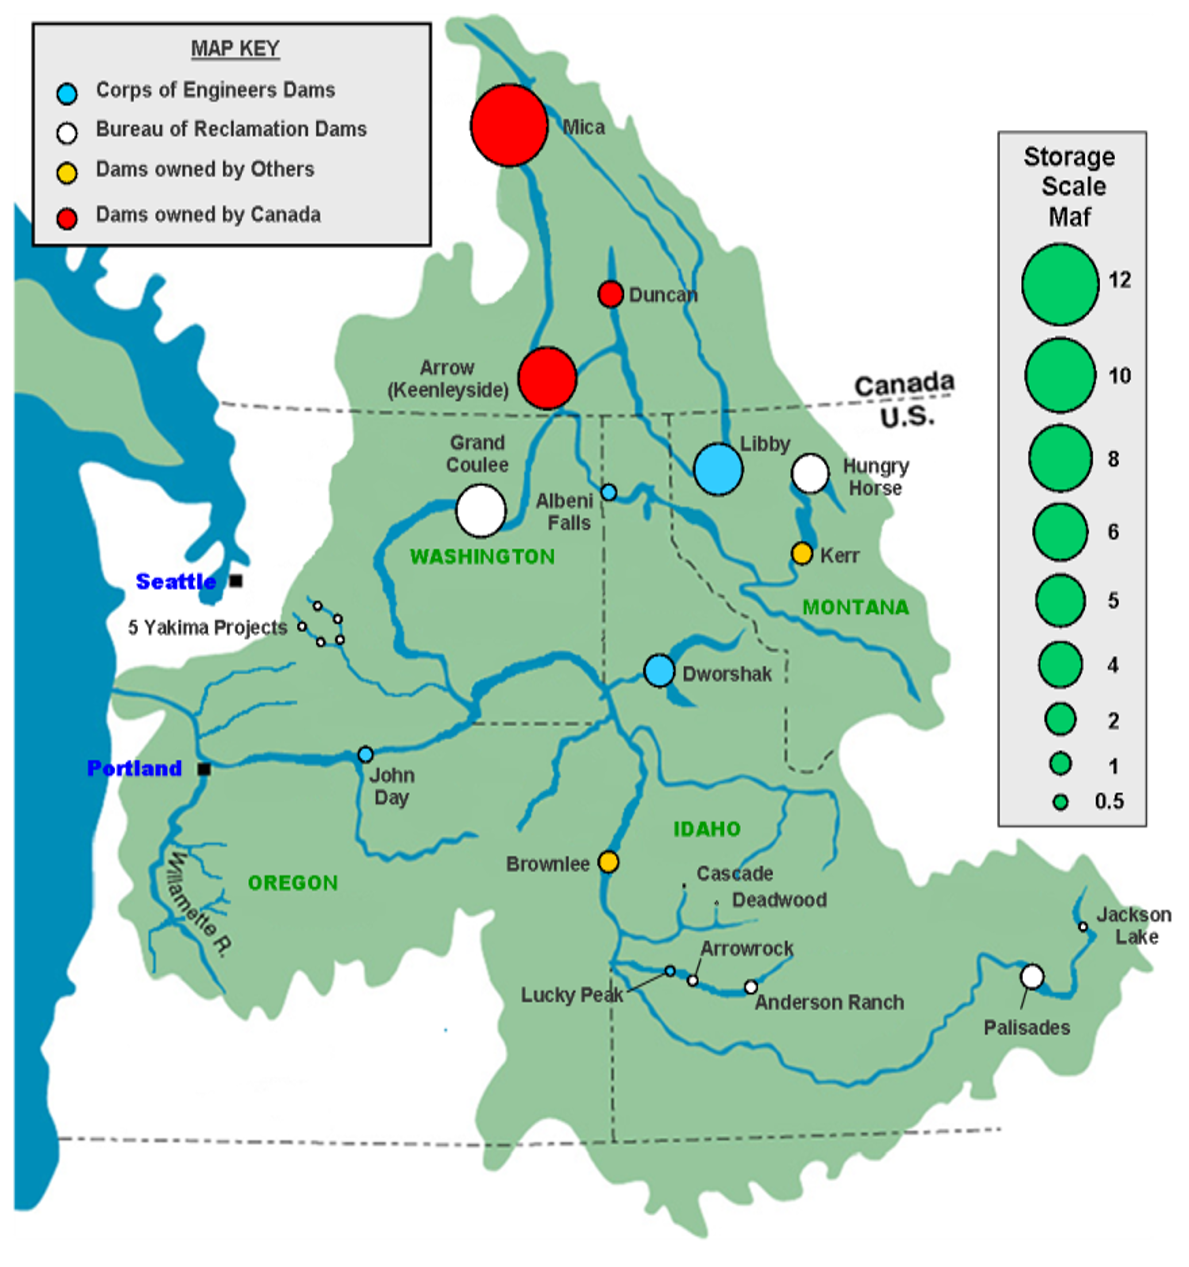 An illustrated map of the Columbia River Basin showing tributaries and circles denoting dams based on reservoir space.